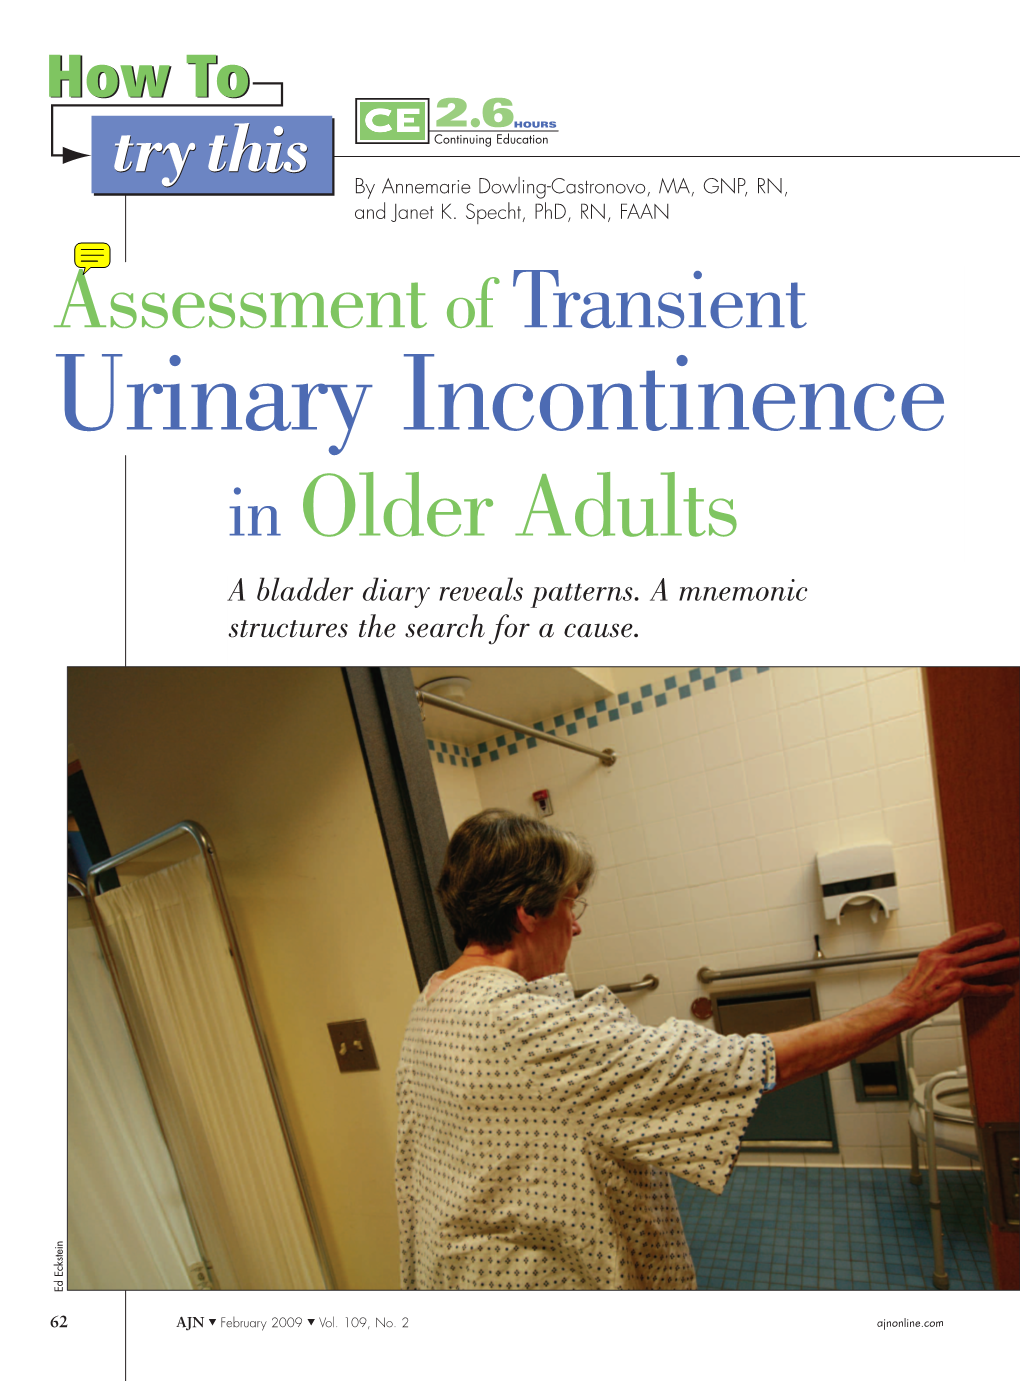 Urinary Incontinence in Older Adults a Bladder Diary Reveals Patterns